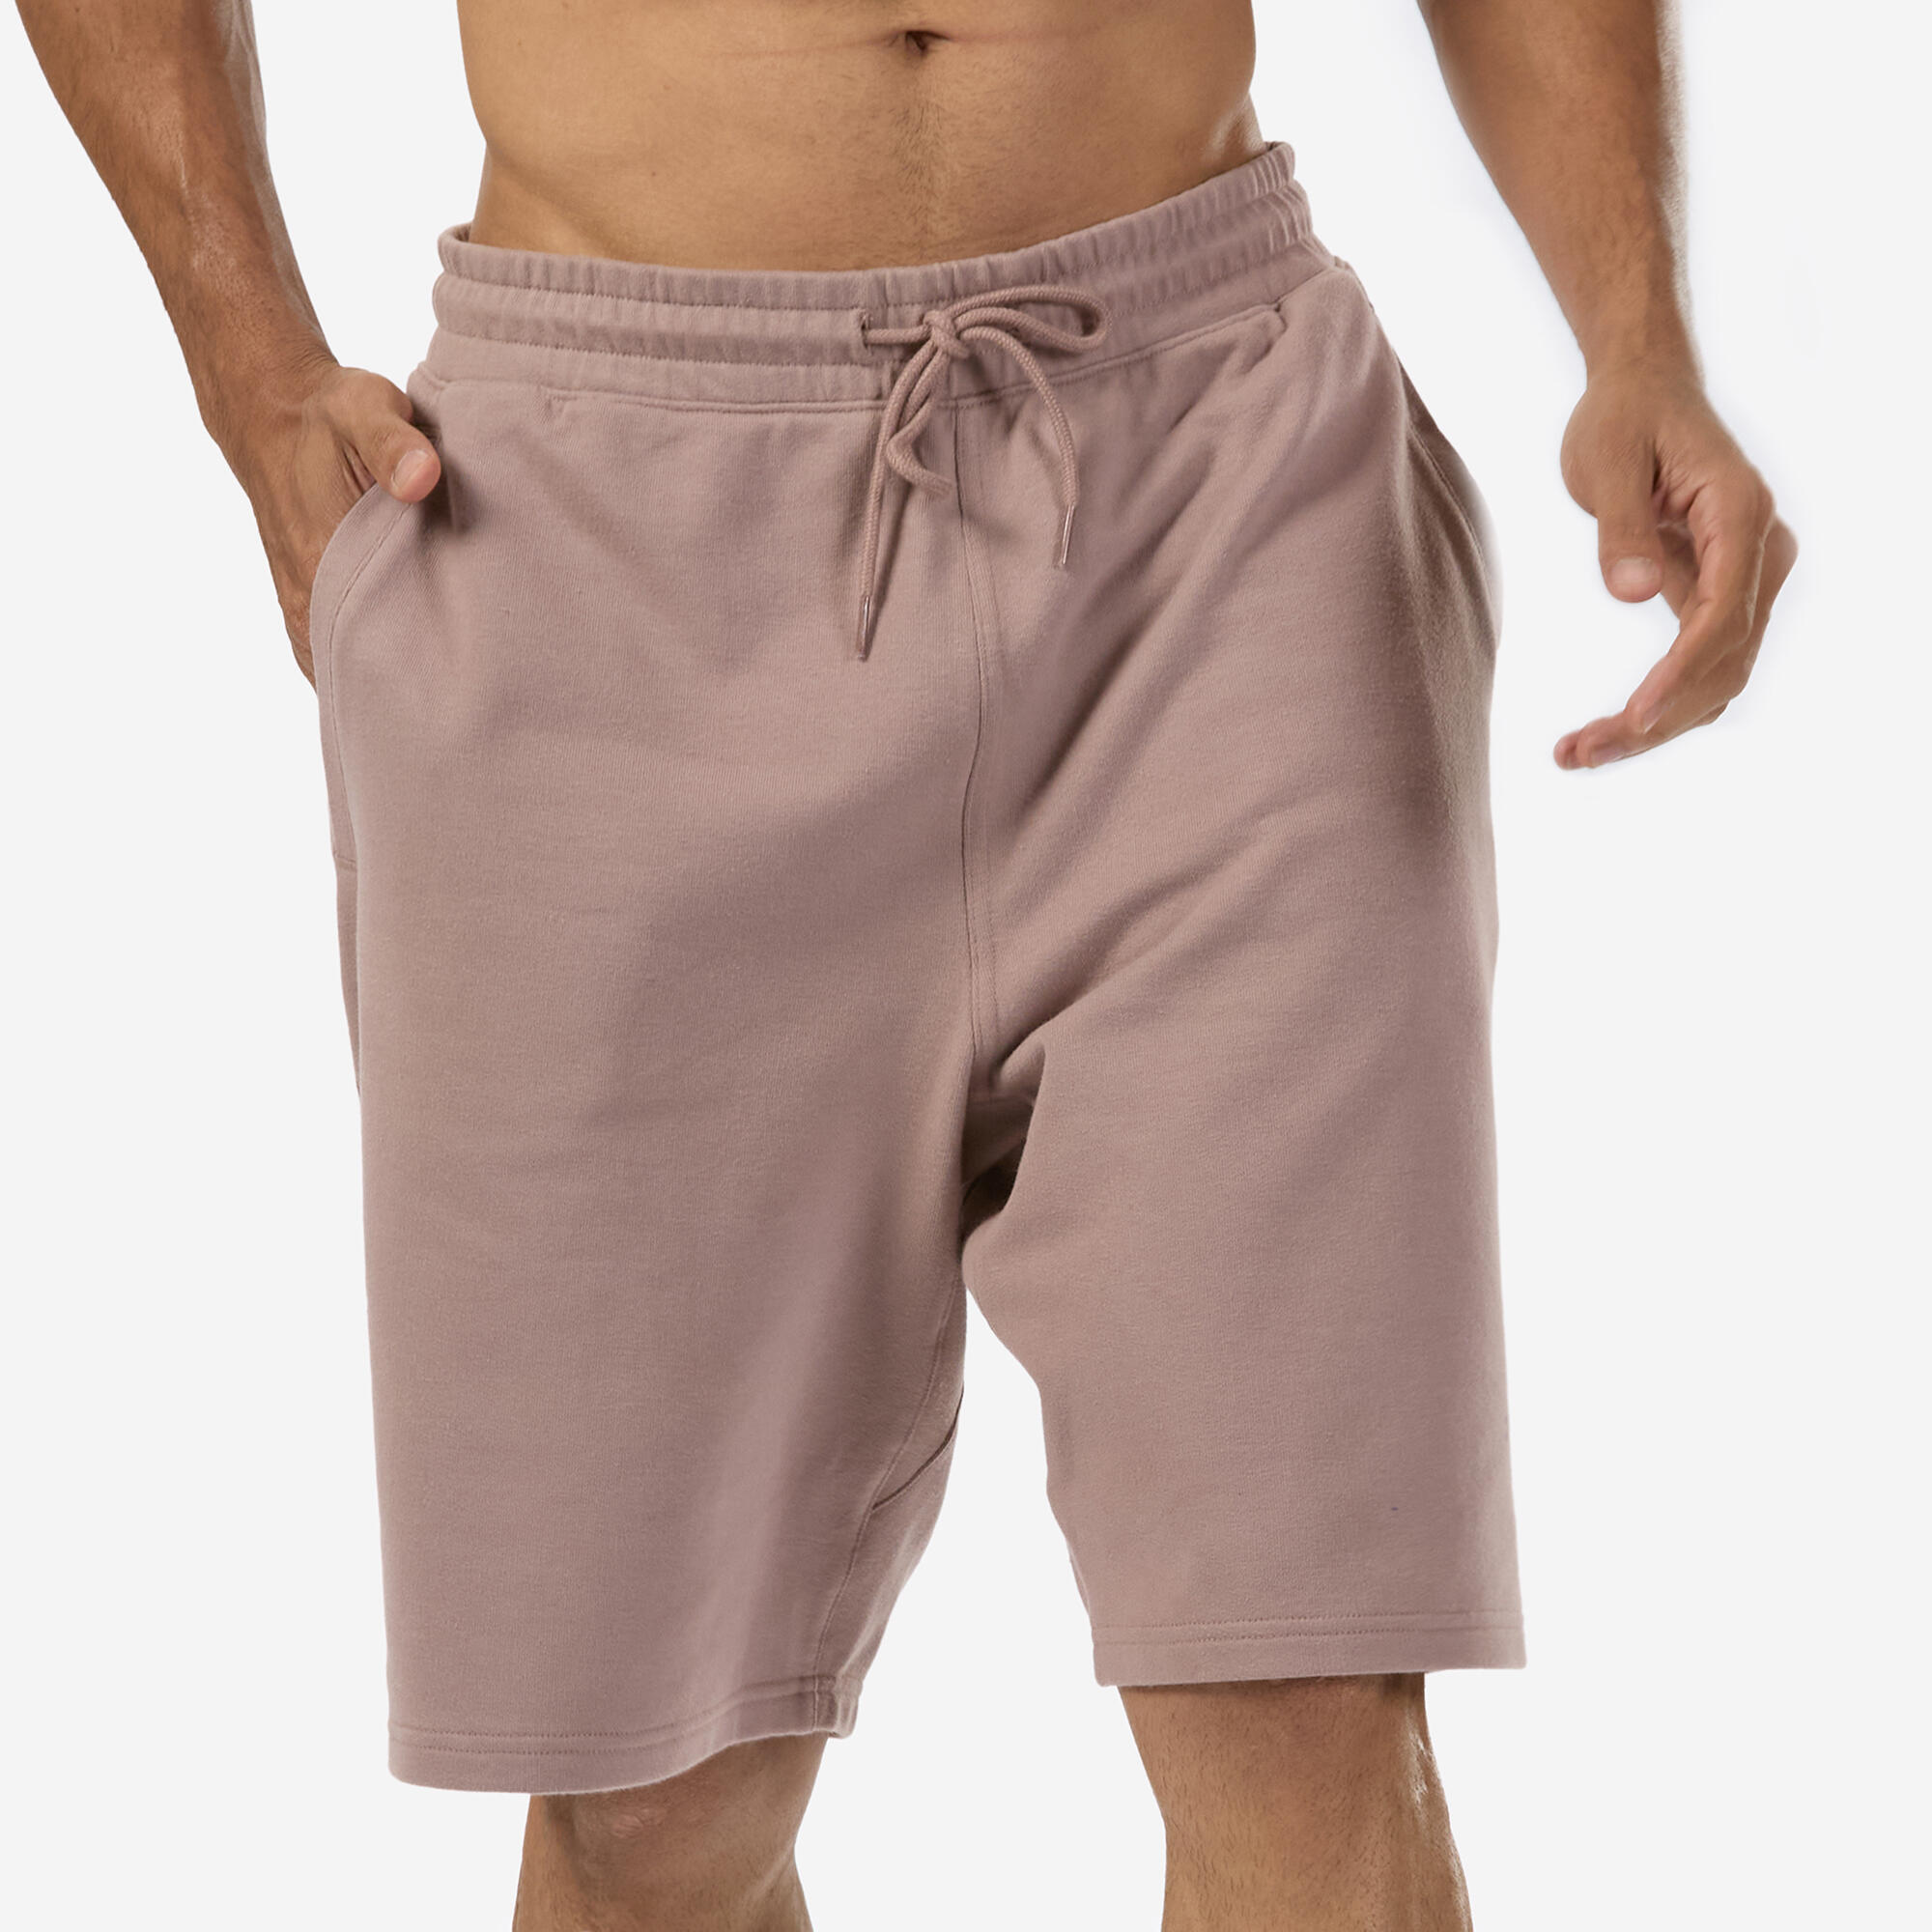 DOMYOS Men's Fitness Shorts - Frost Brown